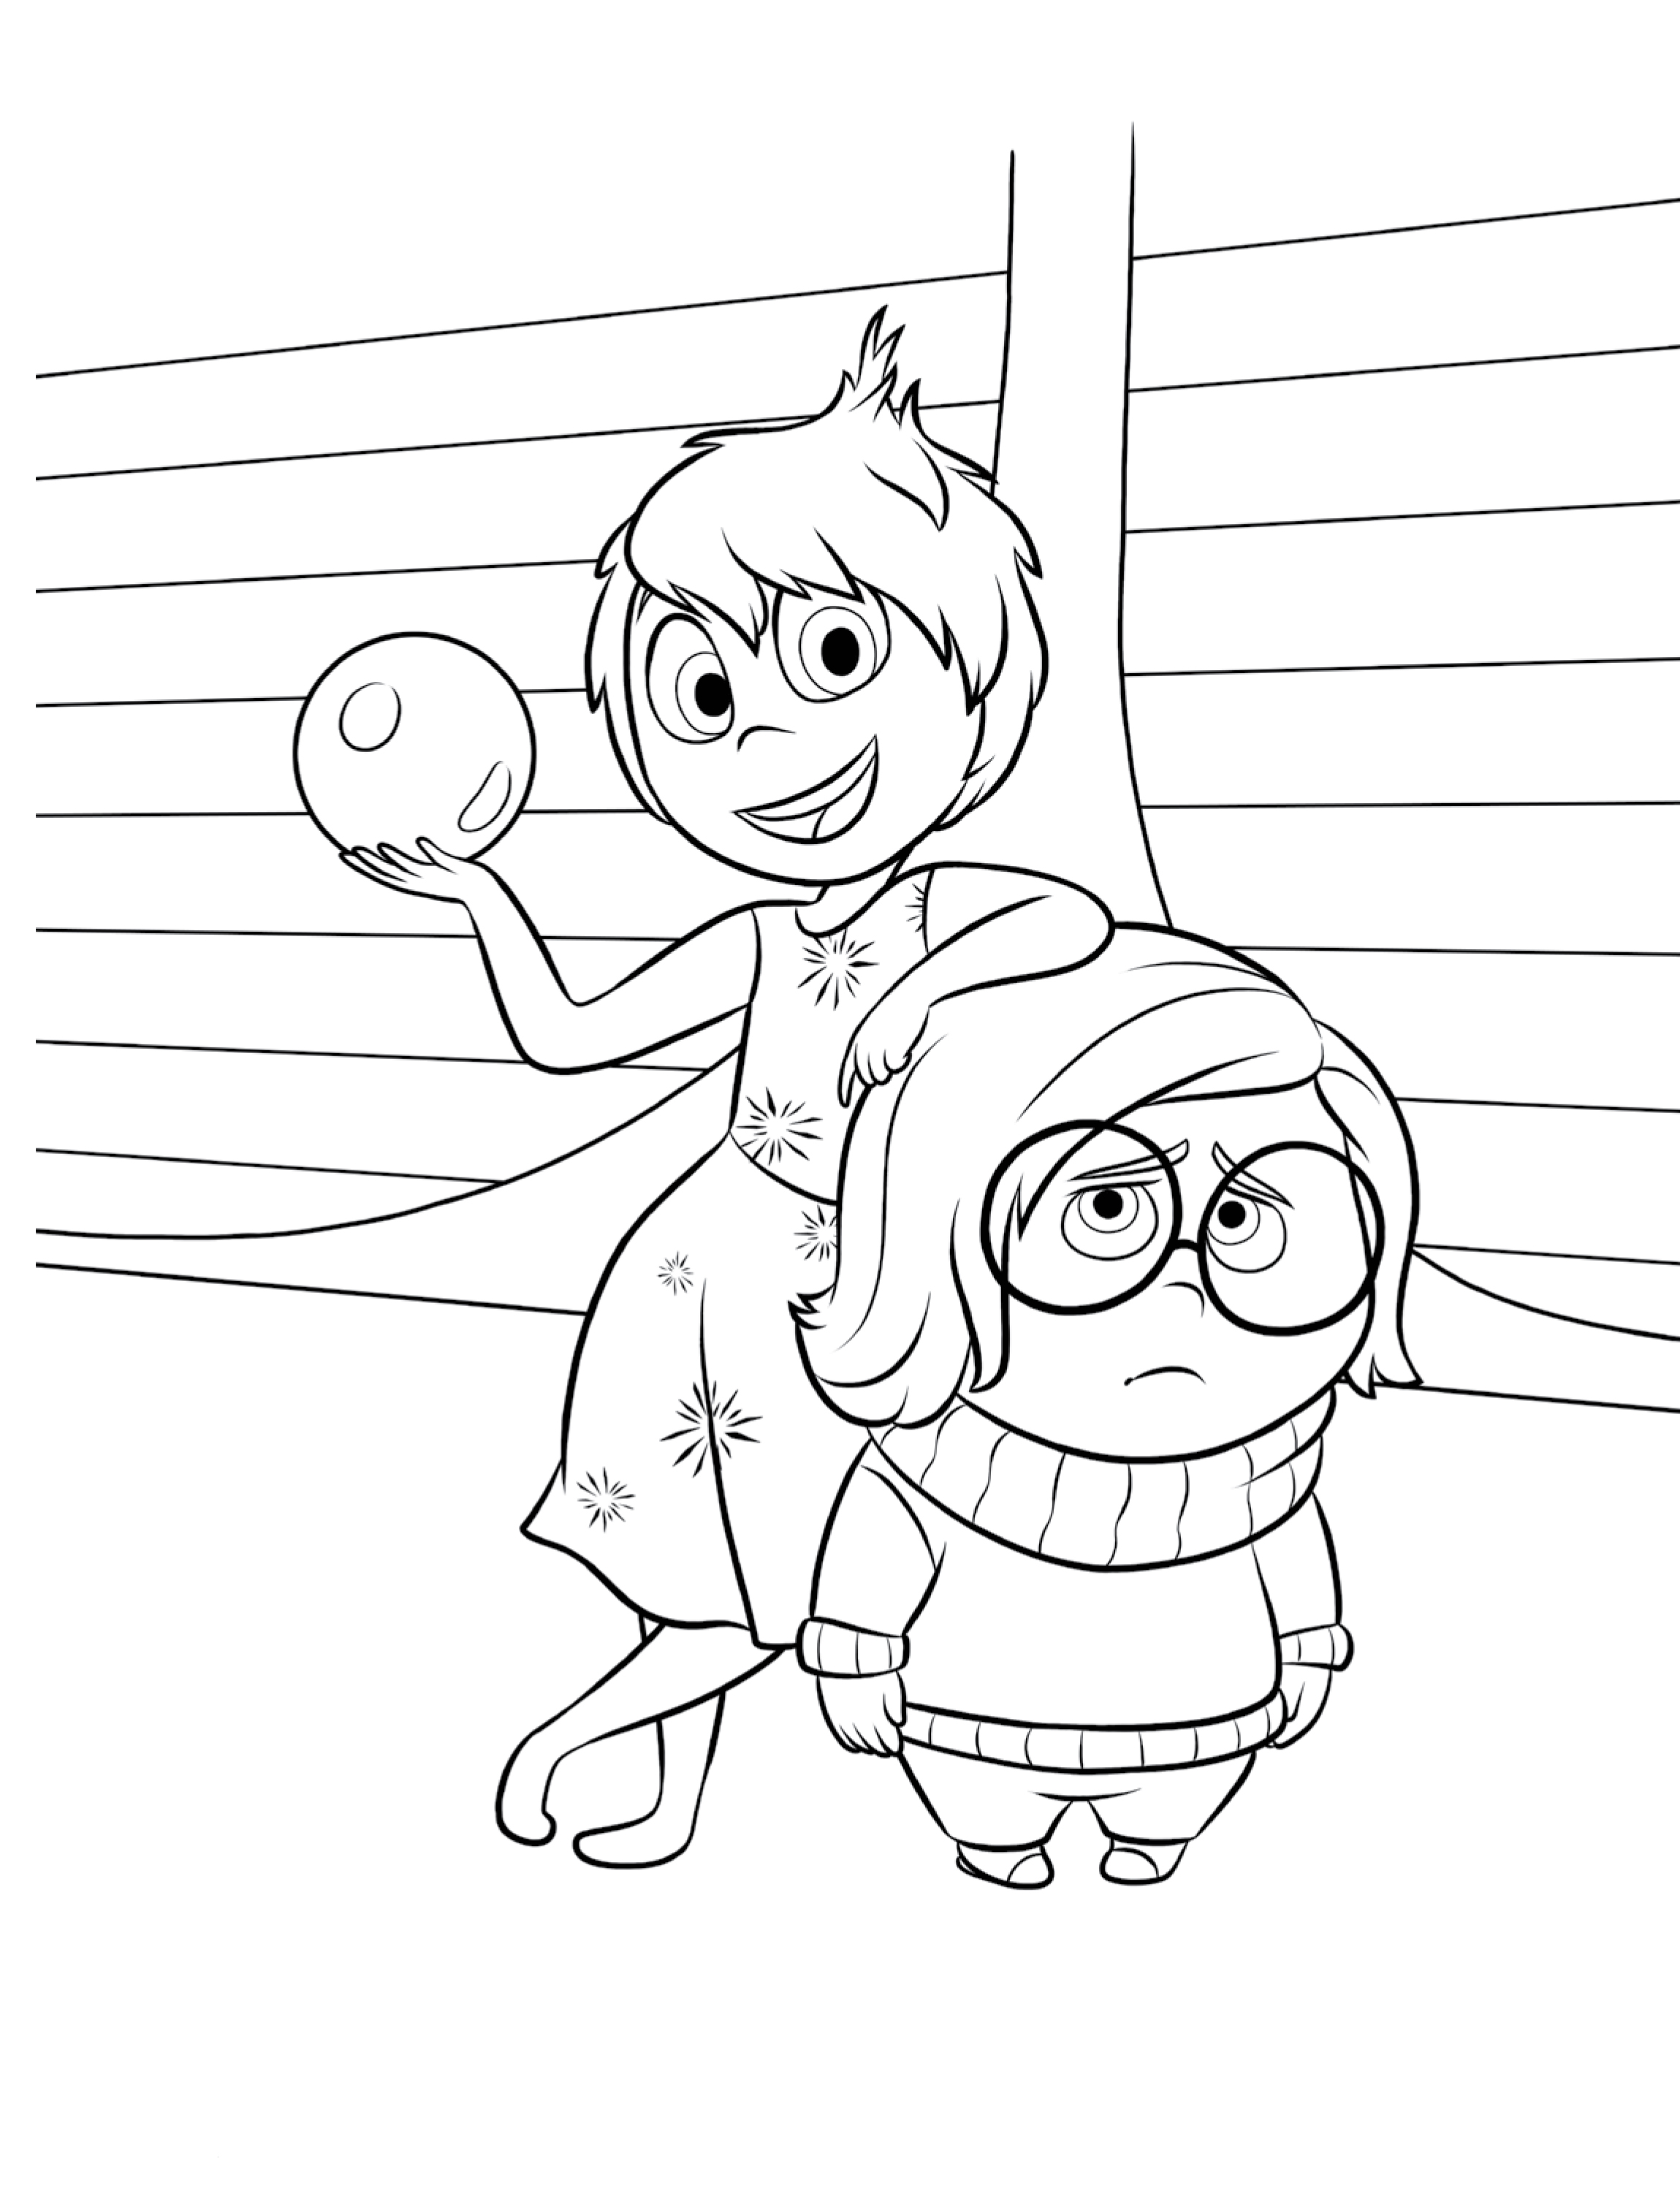 Inside Out Coloring Pages Best Coloring Pages For Kids